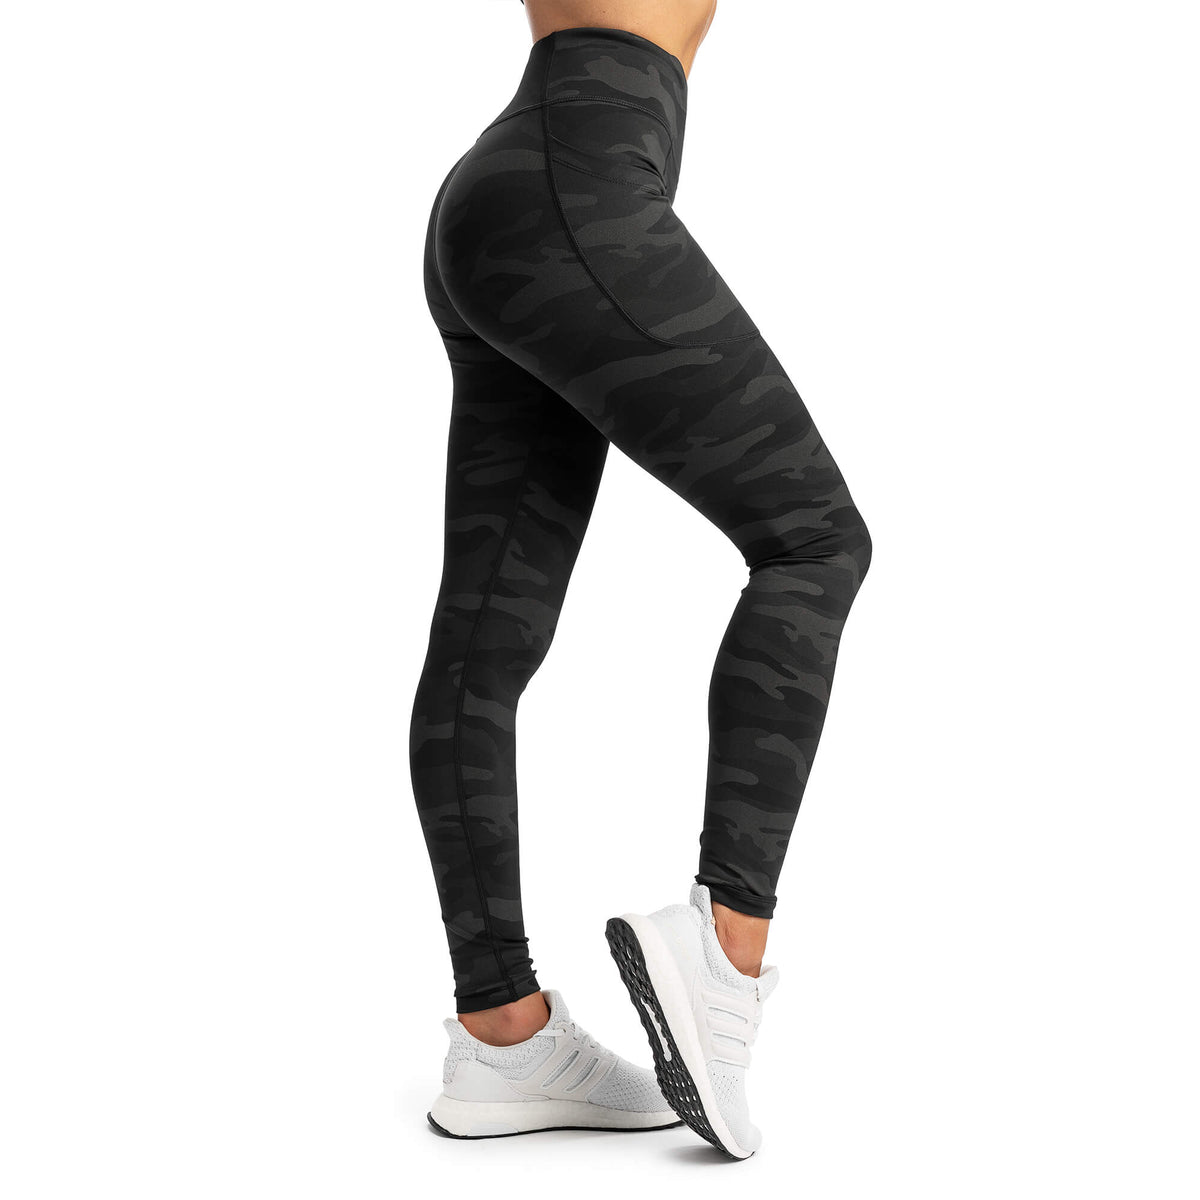 Phisockat Black & Gray Camo Large Athletic Capris Leggings with Pockets  Multiple - $15 (50% Off Retail) - From Danielle